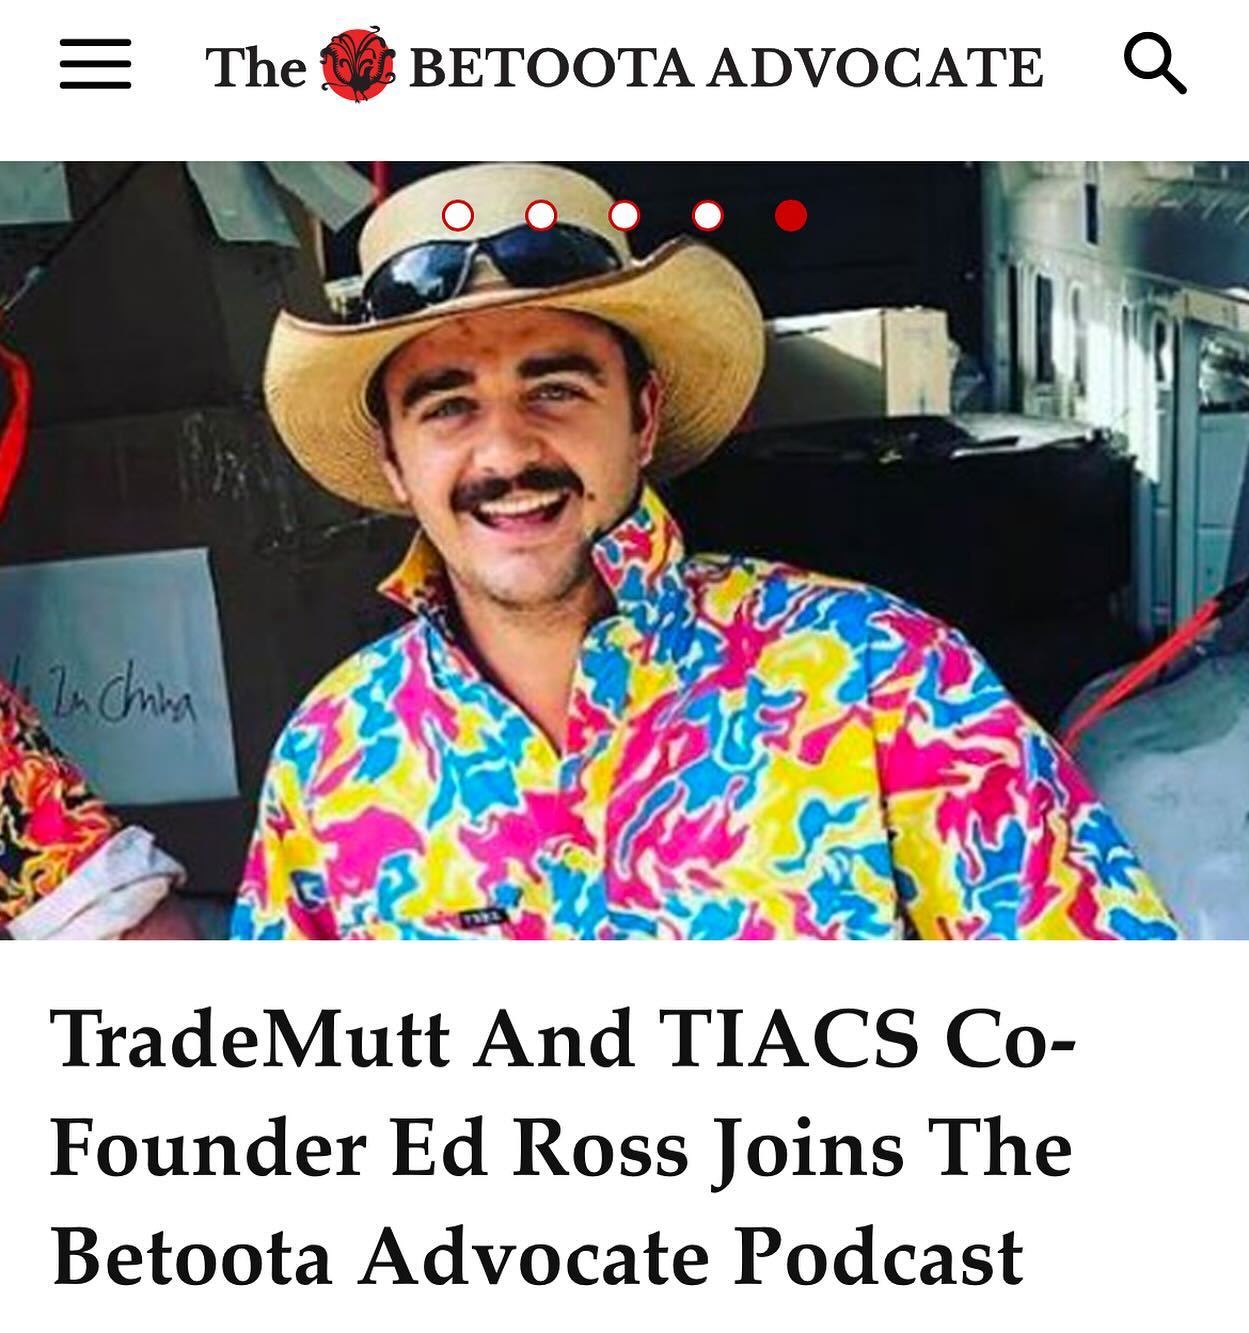 The Betoota Advocate Podcast: Ed Ross (Co-Founder of TradeMutt and TIACS)